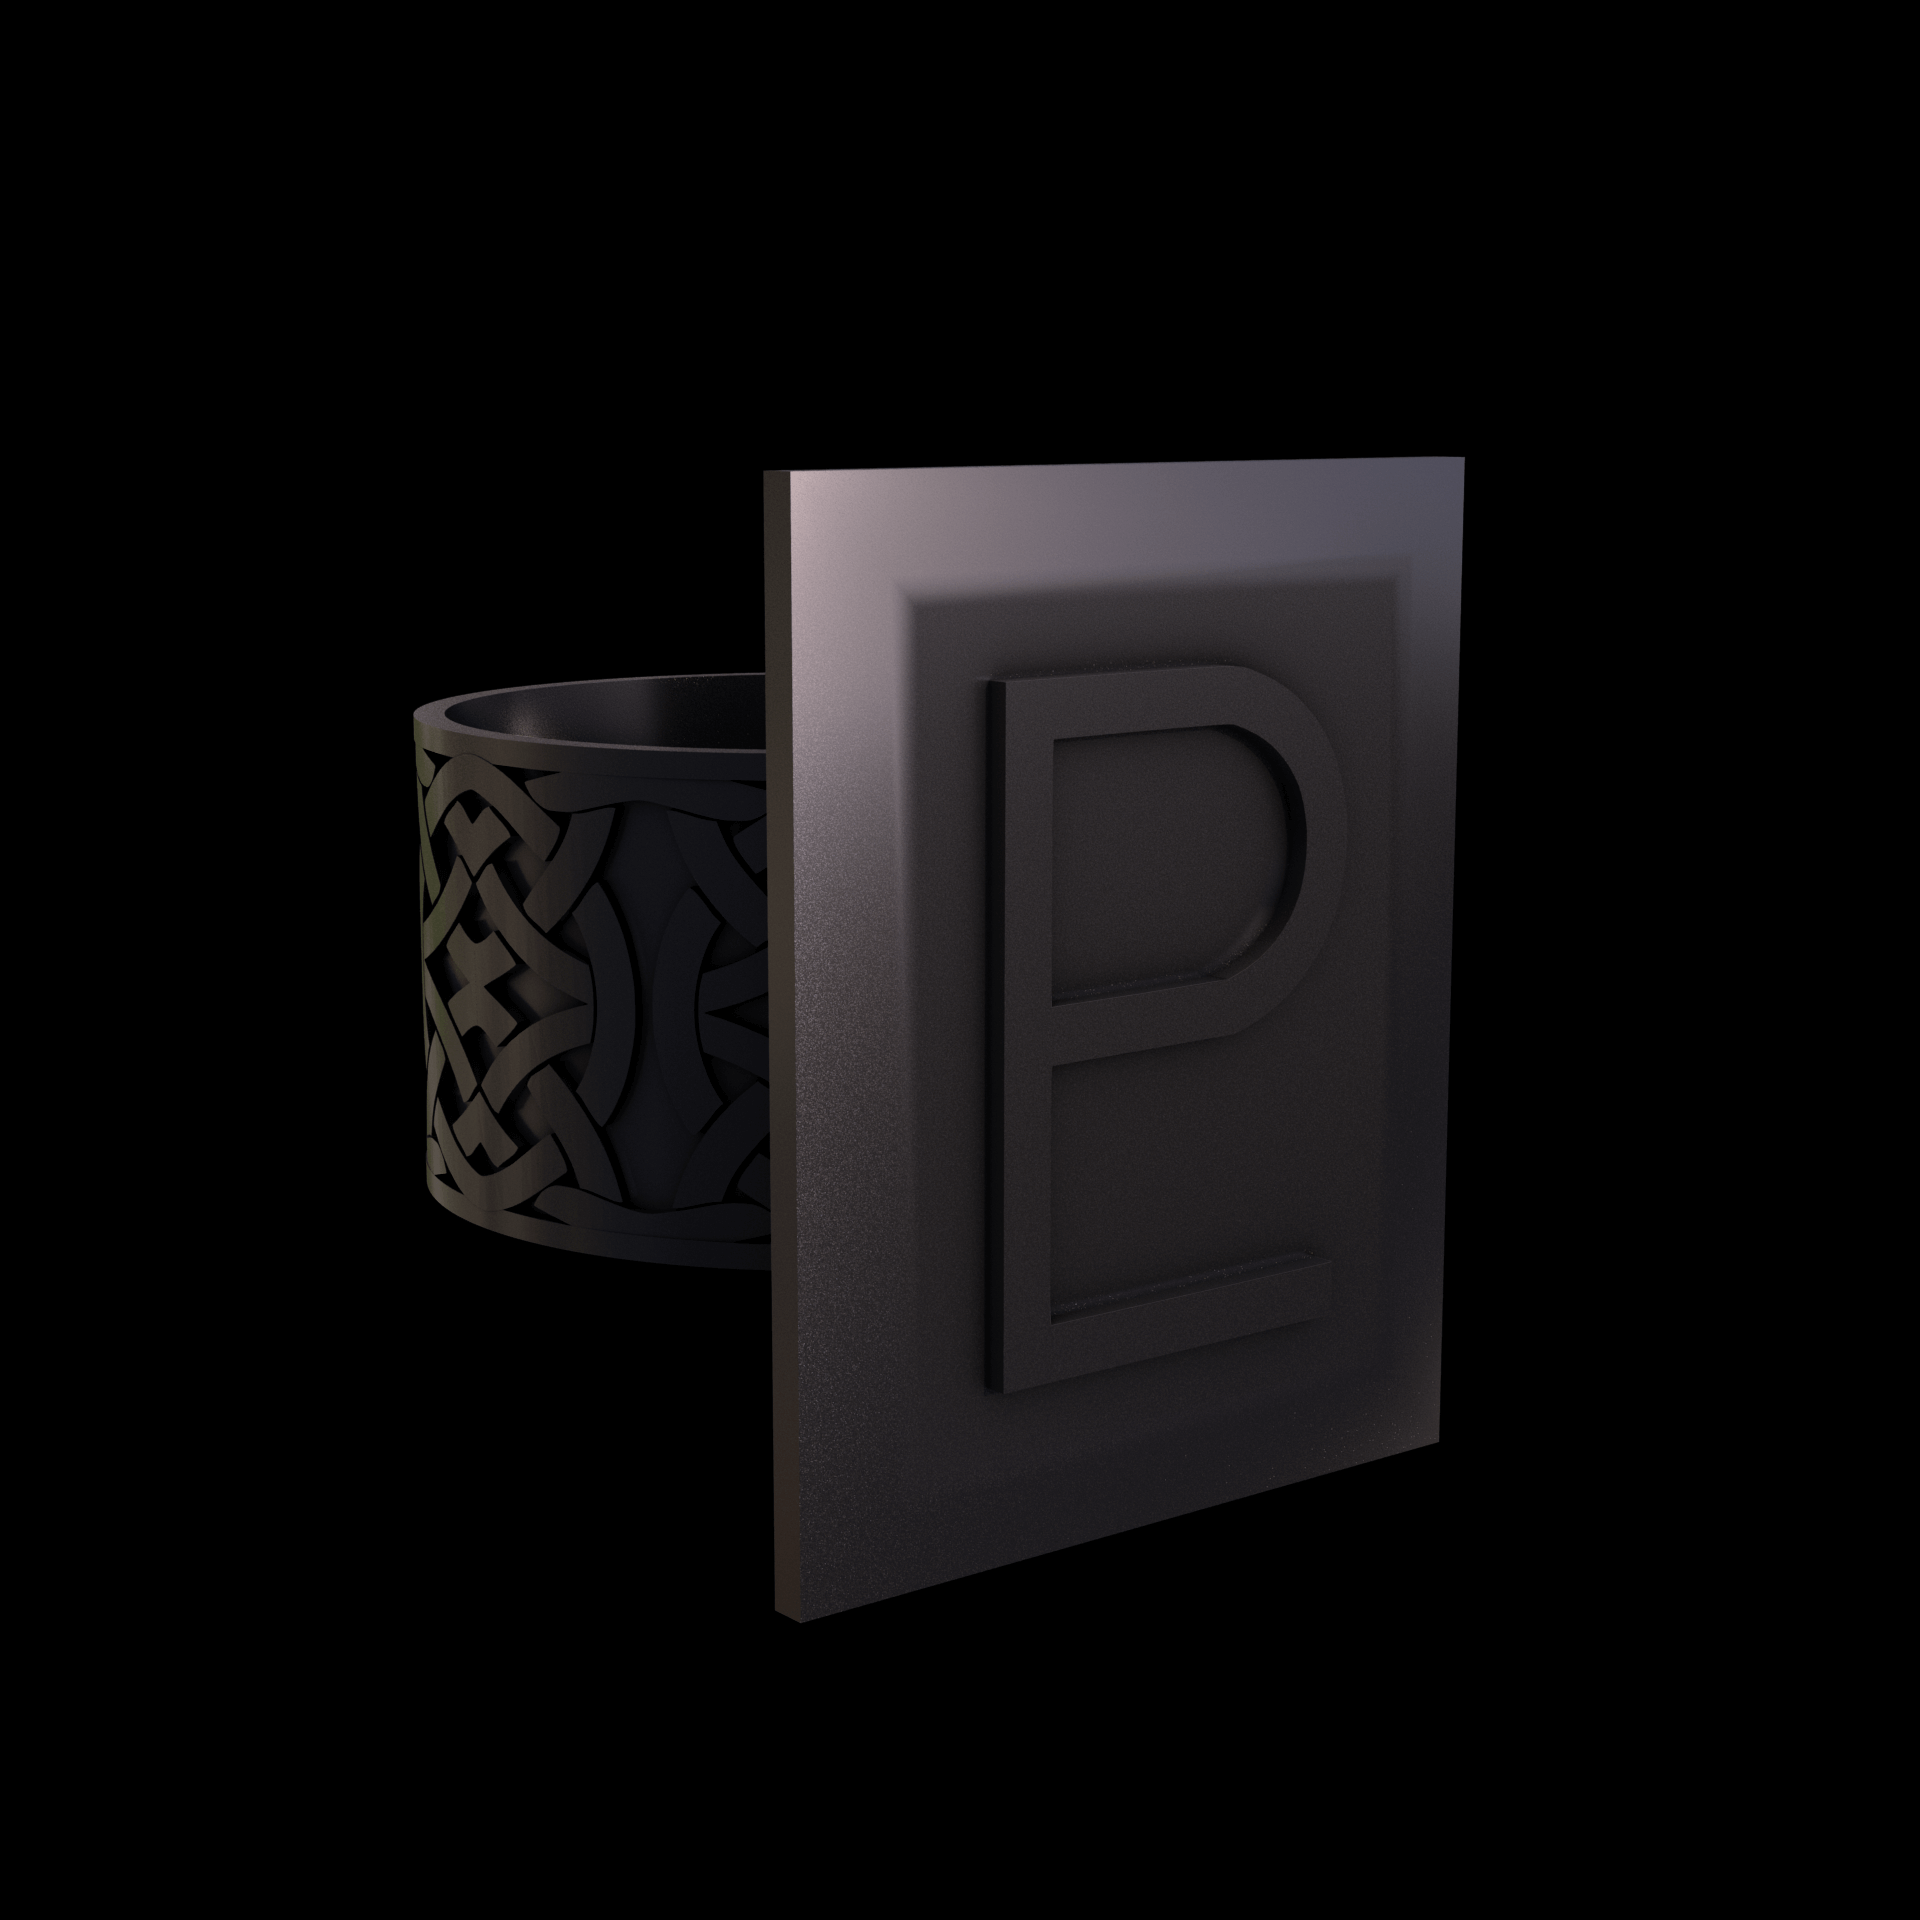 Bronze infused 420 stainless steel, manufactured using 3D printing, with visible print lines.